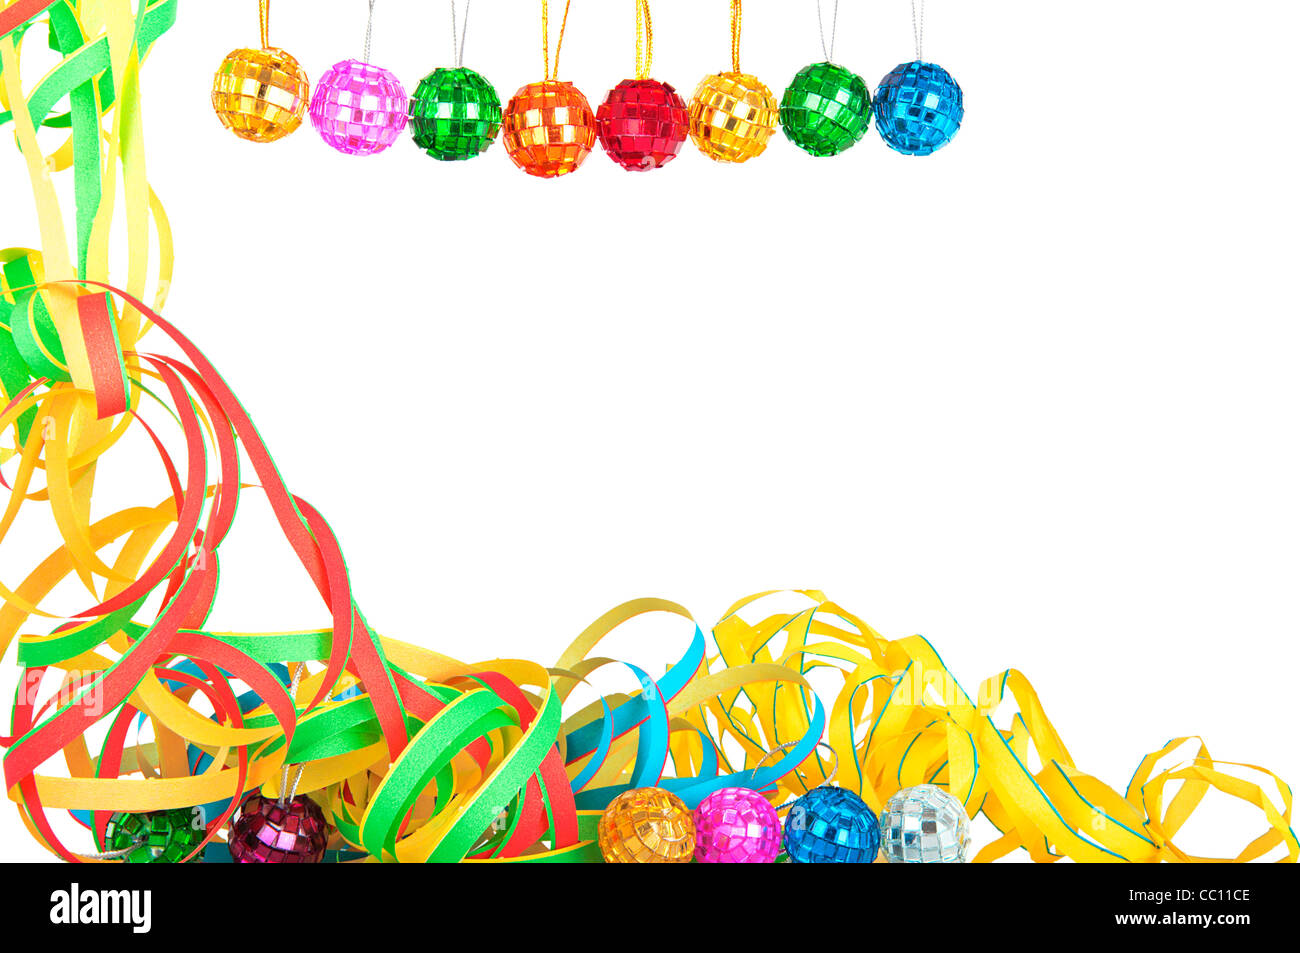 Colorful party decoration Stock Photo